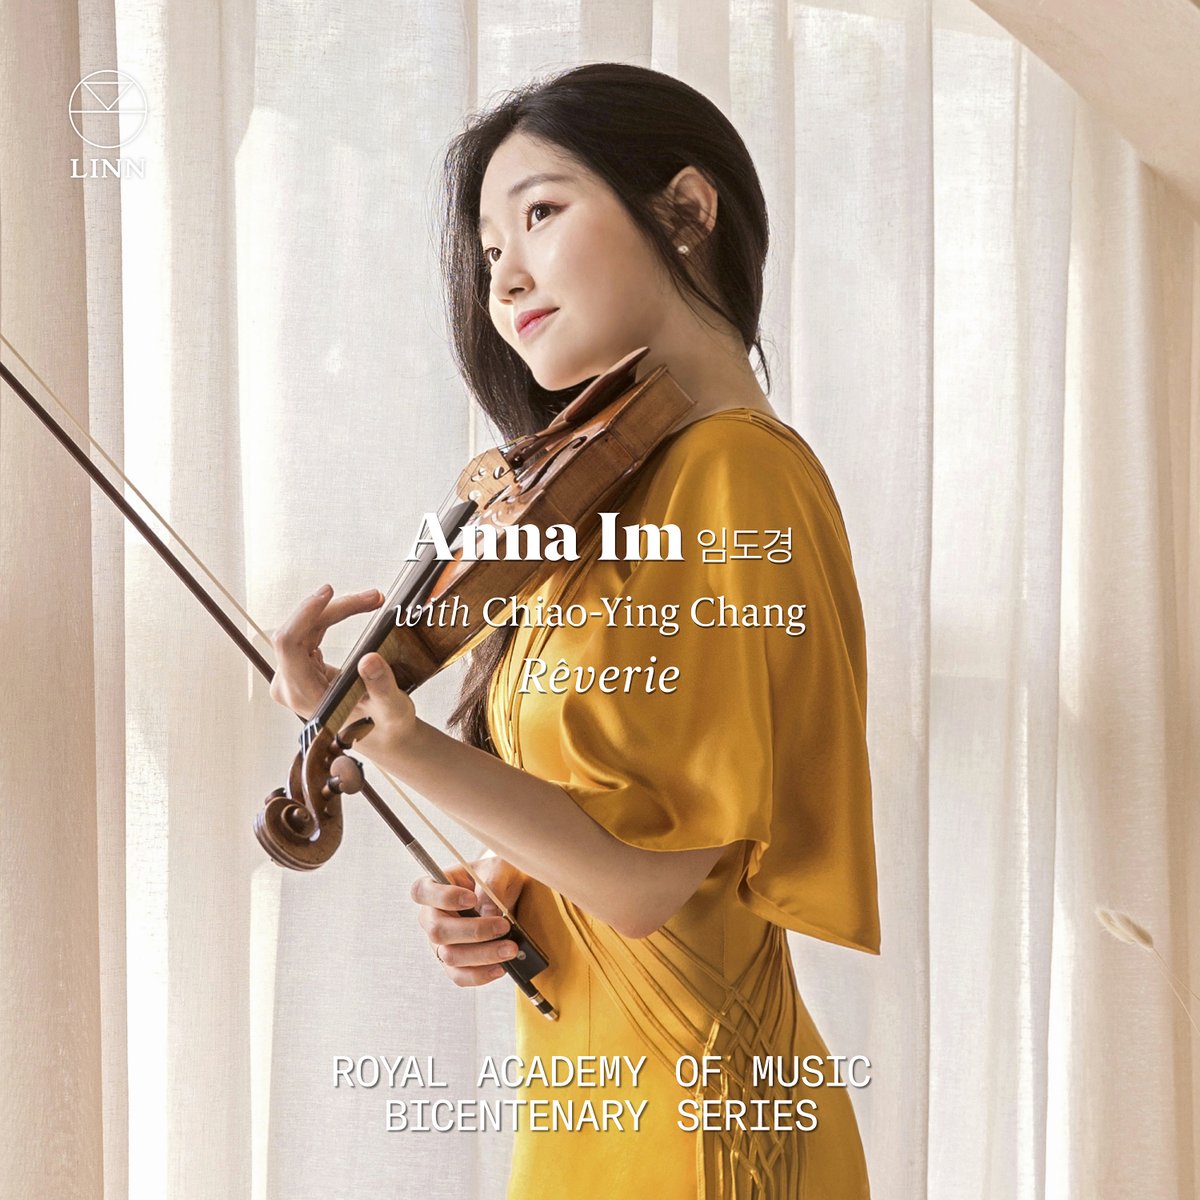 OUT TODAY! For her Linn debut Anna Im presents Rêverie featuring Fauré’s Violin Sonata No. 1 & Amy Beach’s Romance alongside pianist @chiaoying_chang. It is the latest recording in our @RoyalAcadMusic Bicentenary Series. ► Download or stream the album: lnk.to/Reverie_AnnaIm…